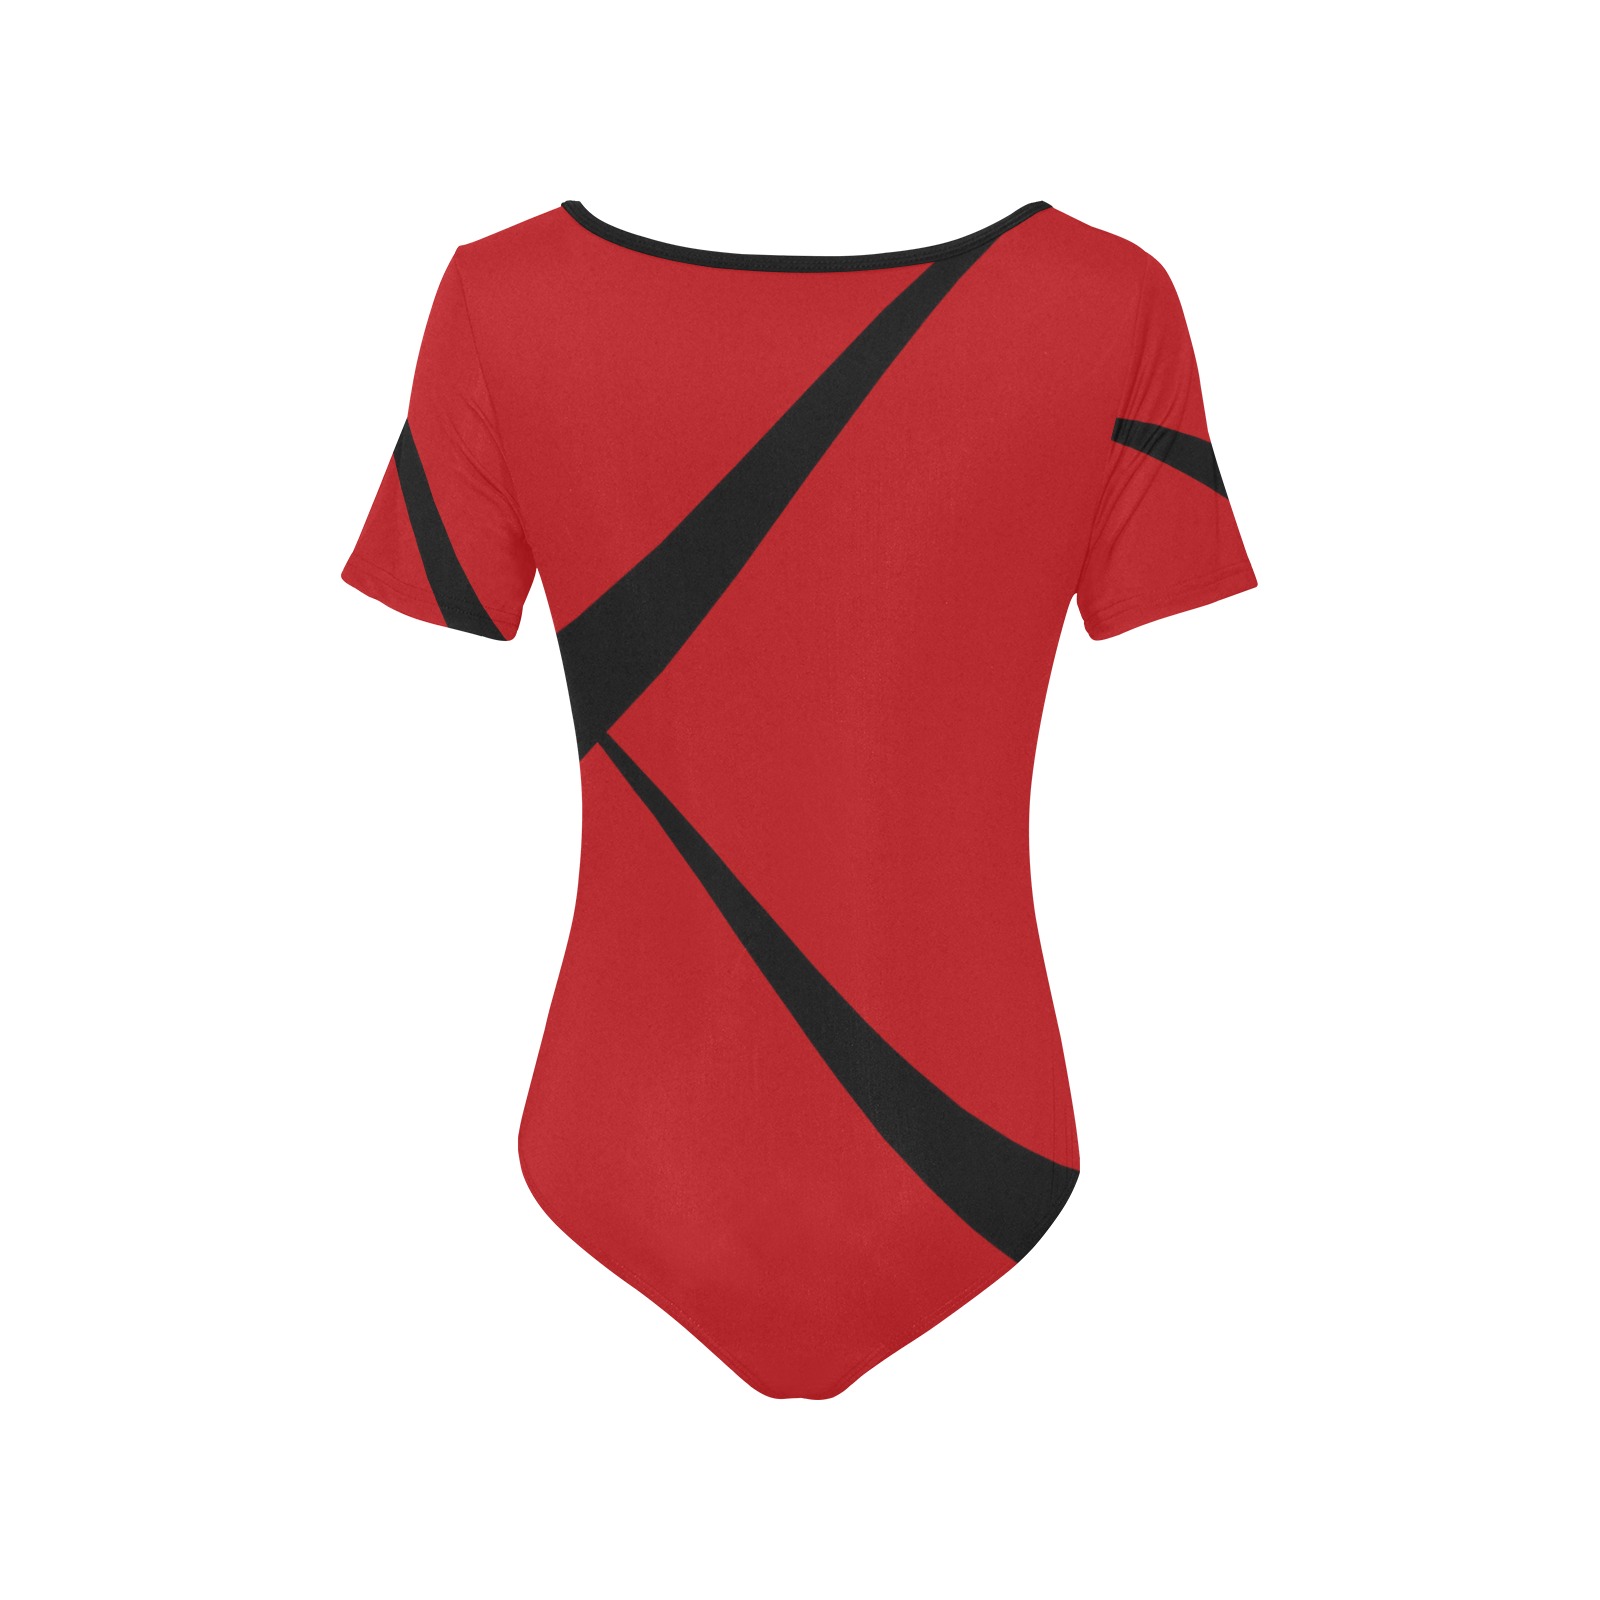 Sexy Red and Black Women's Short Sleeve Bodysuit